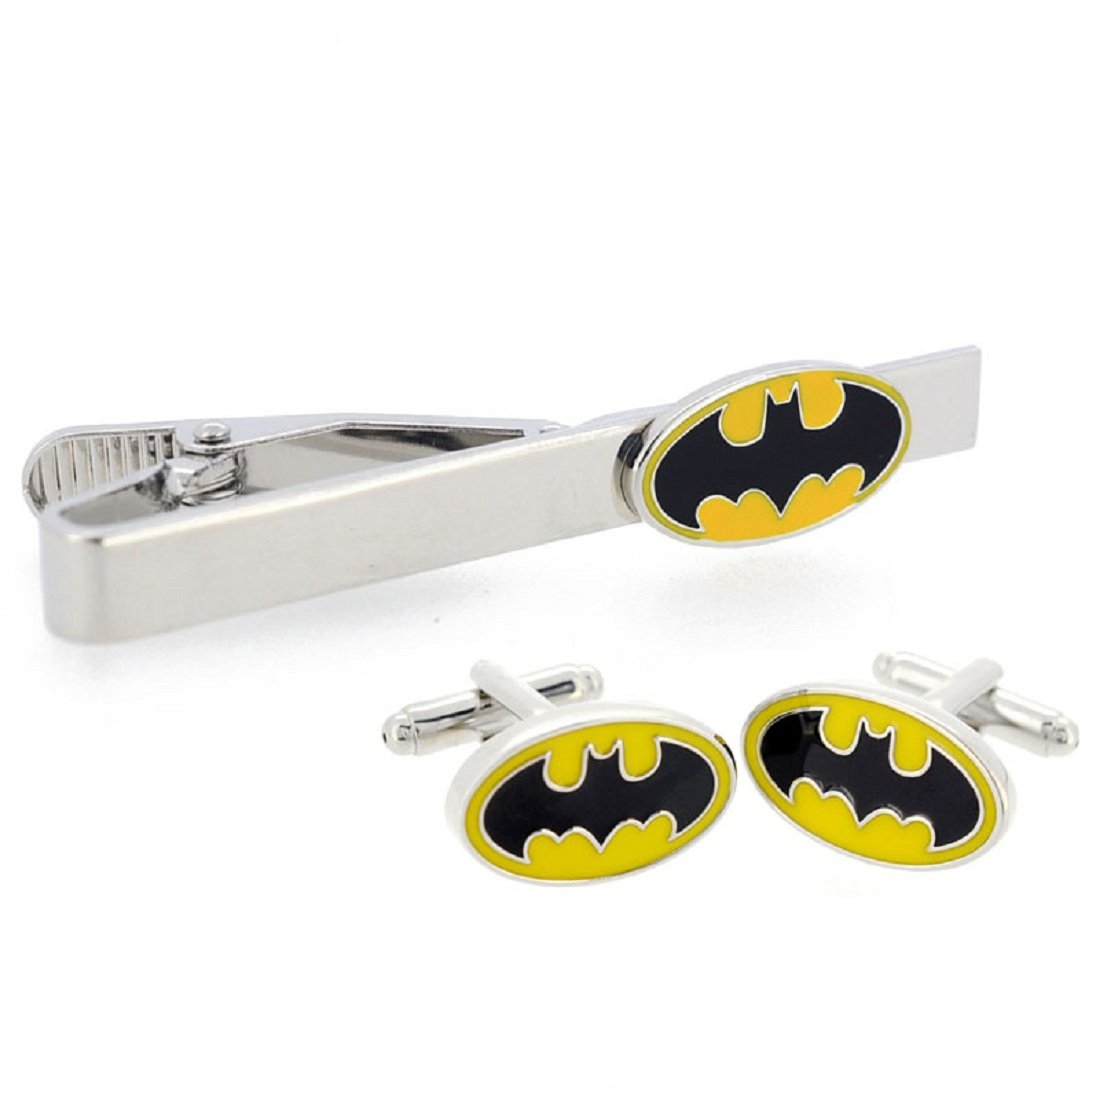 Yellow and Black Batman Cufflinks and Tie Clip Set – SHOPWITHSTYLE